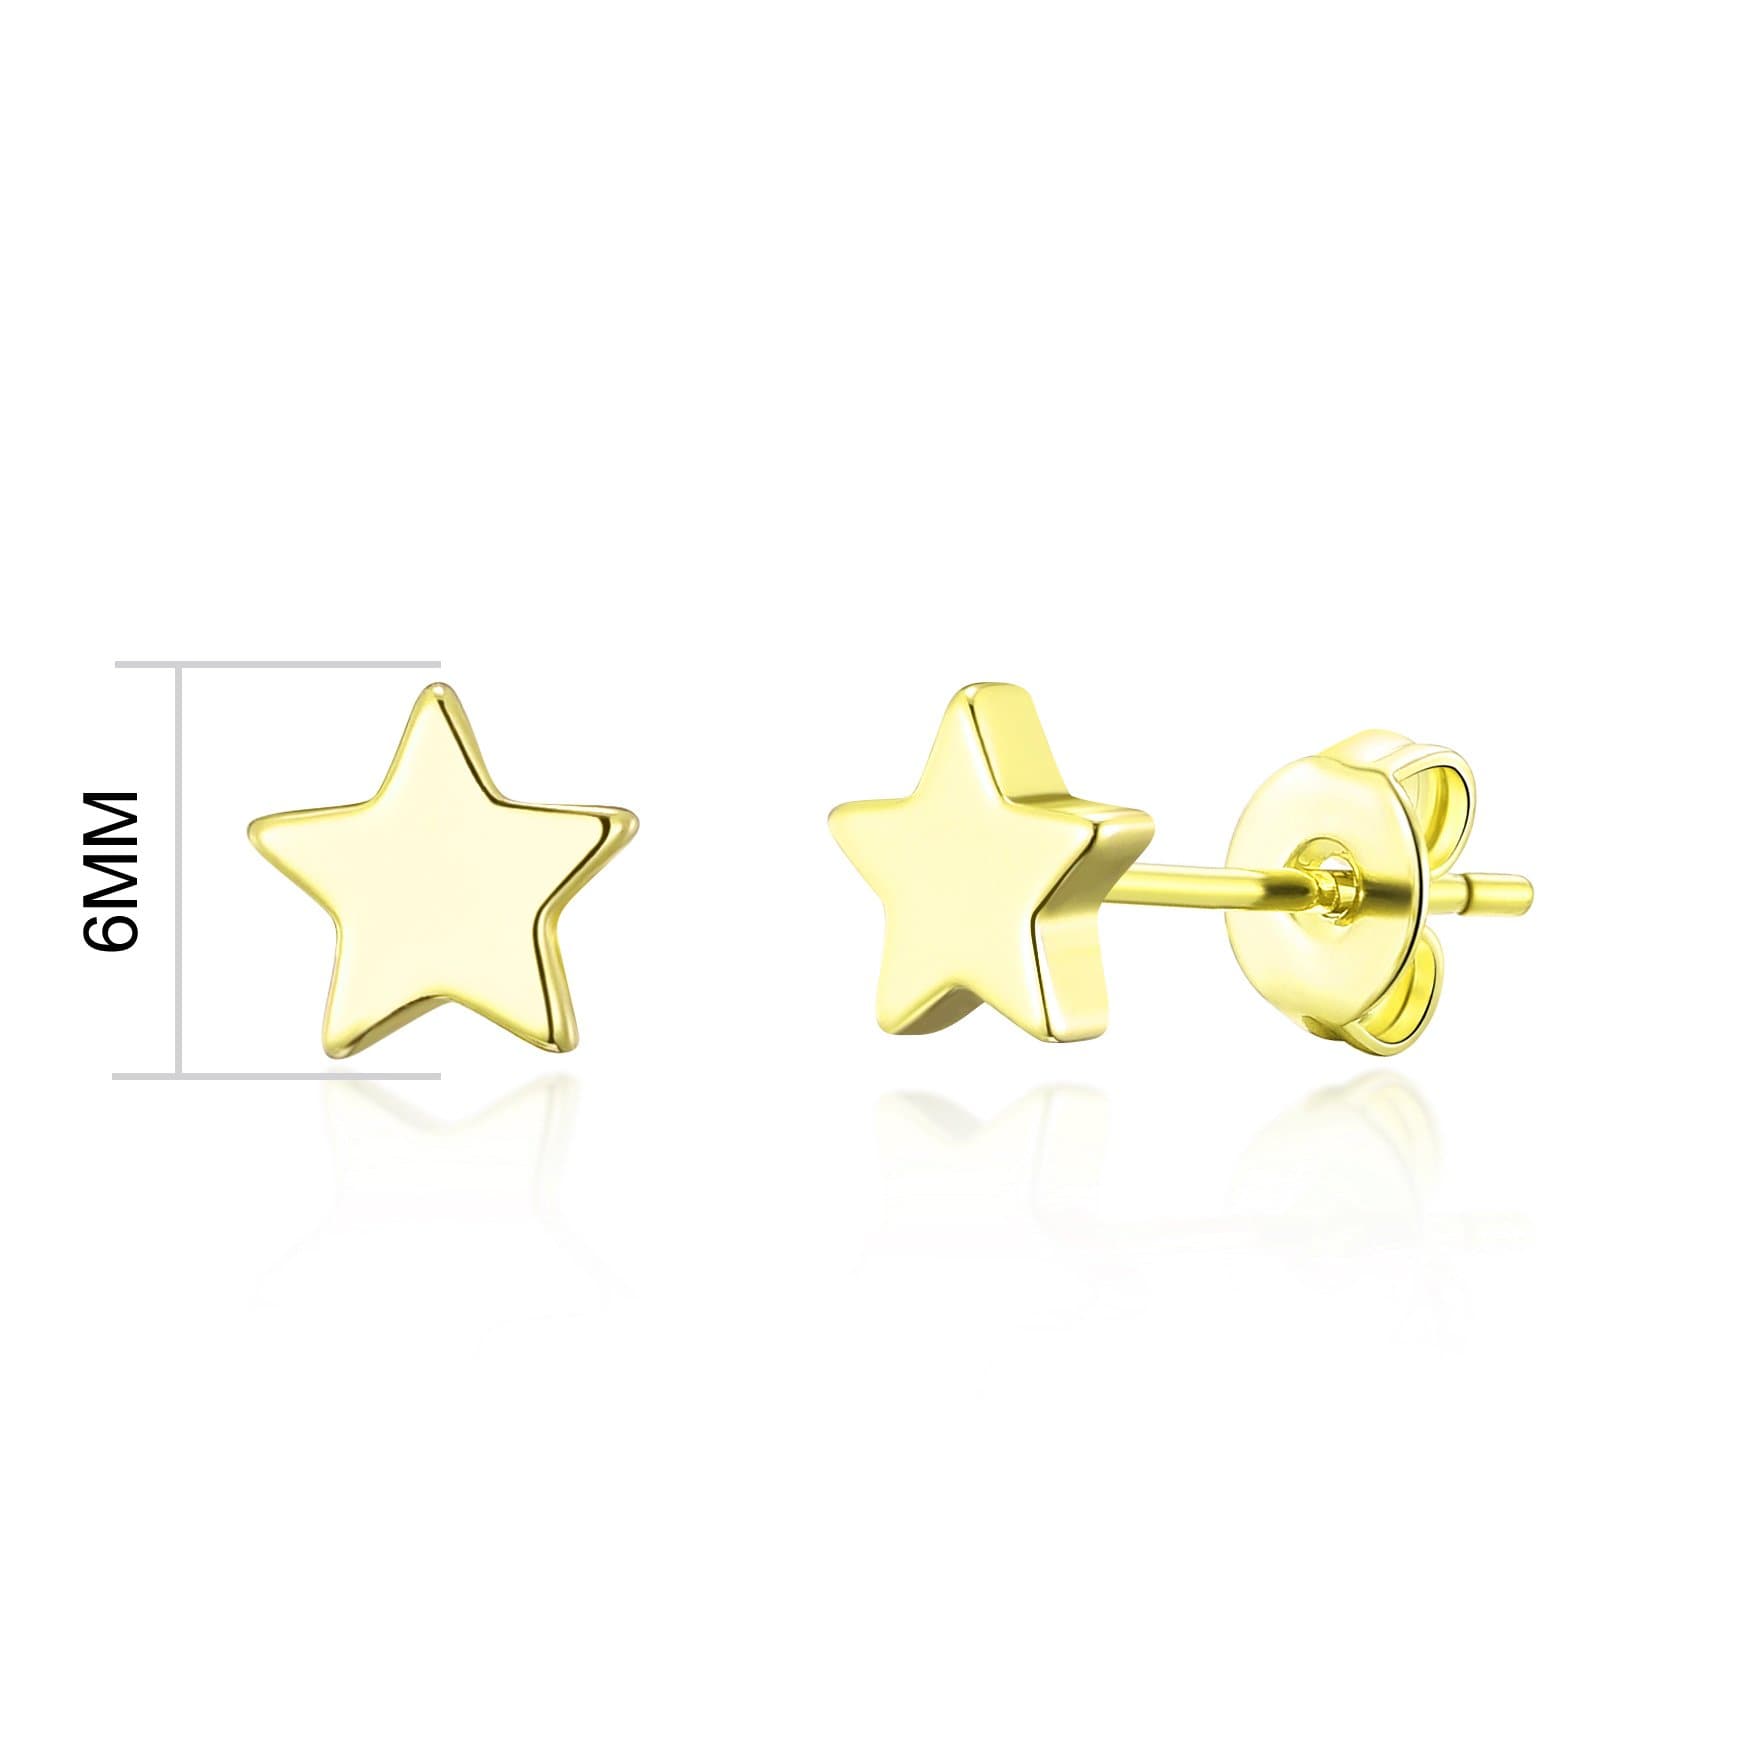 Gold Plated Star Stud Earrings with Quote Card